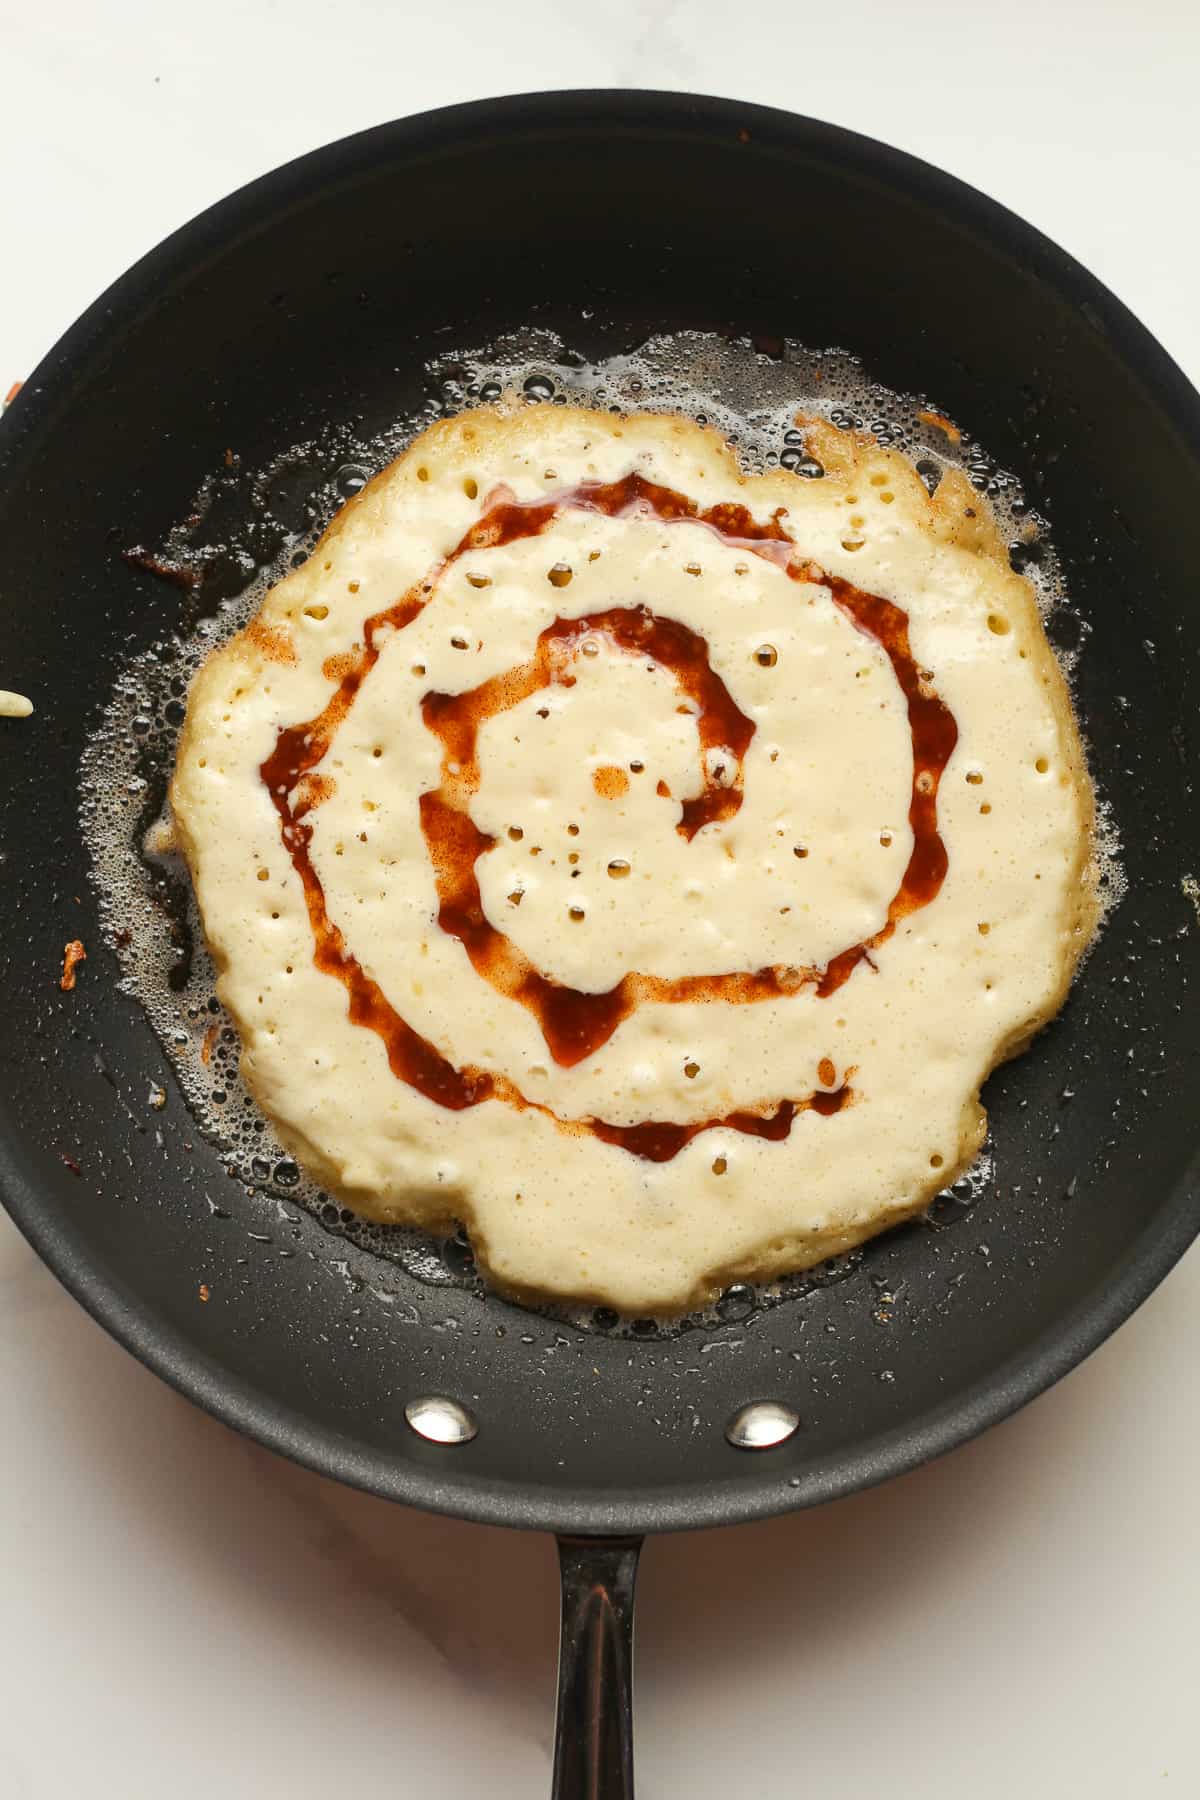 A pancake cooking in a pan with a swirl.